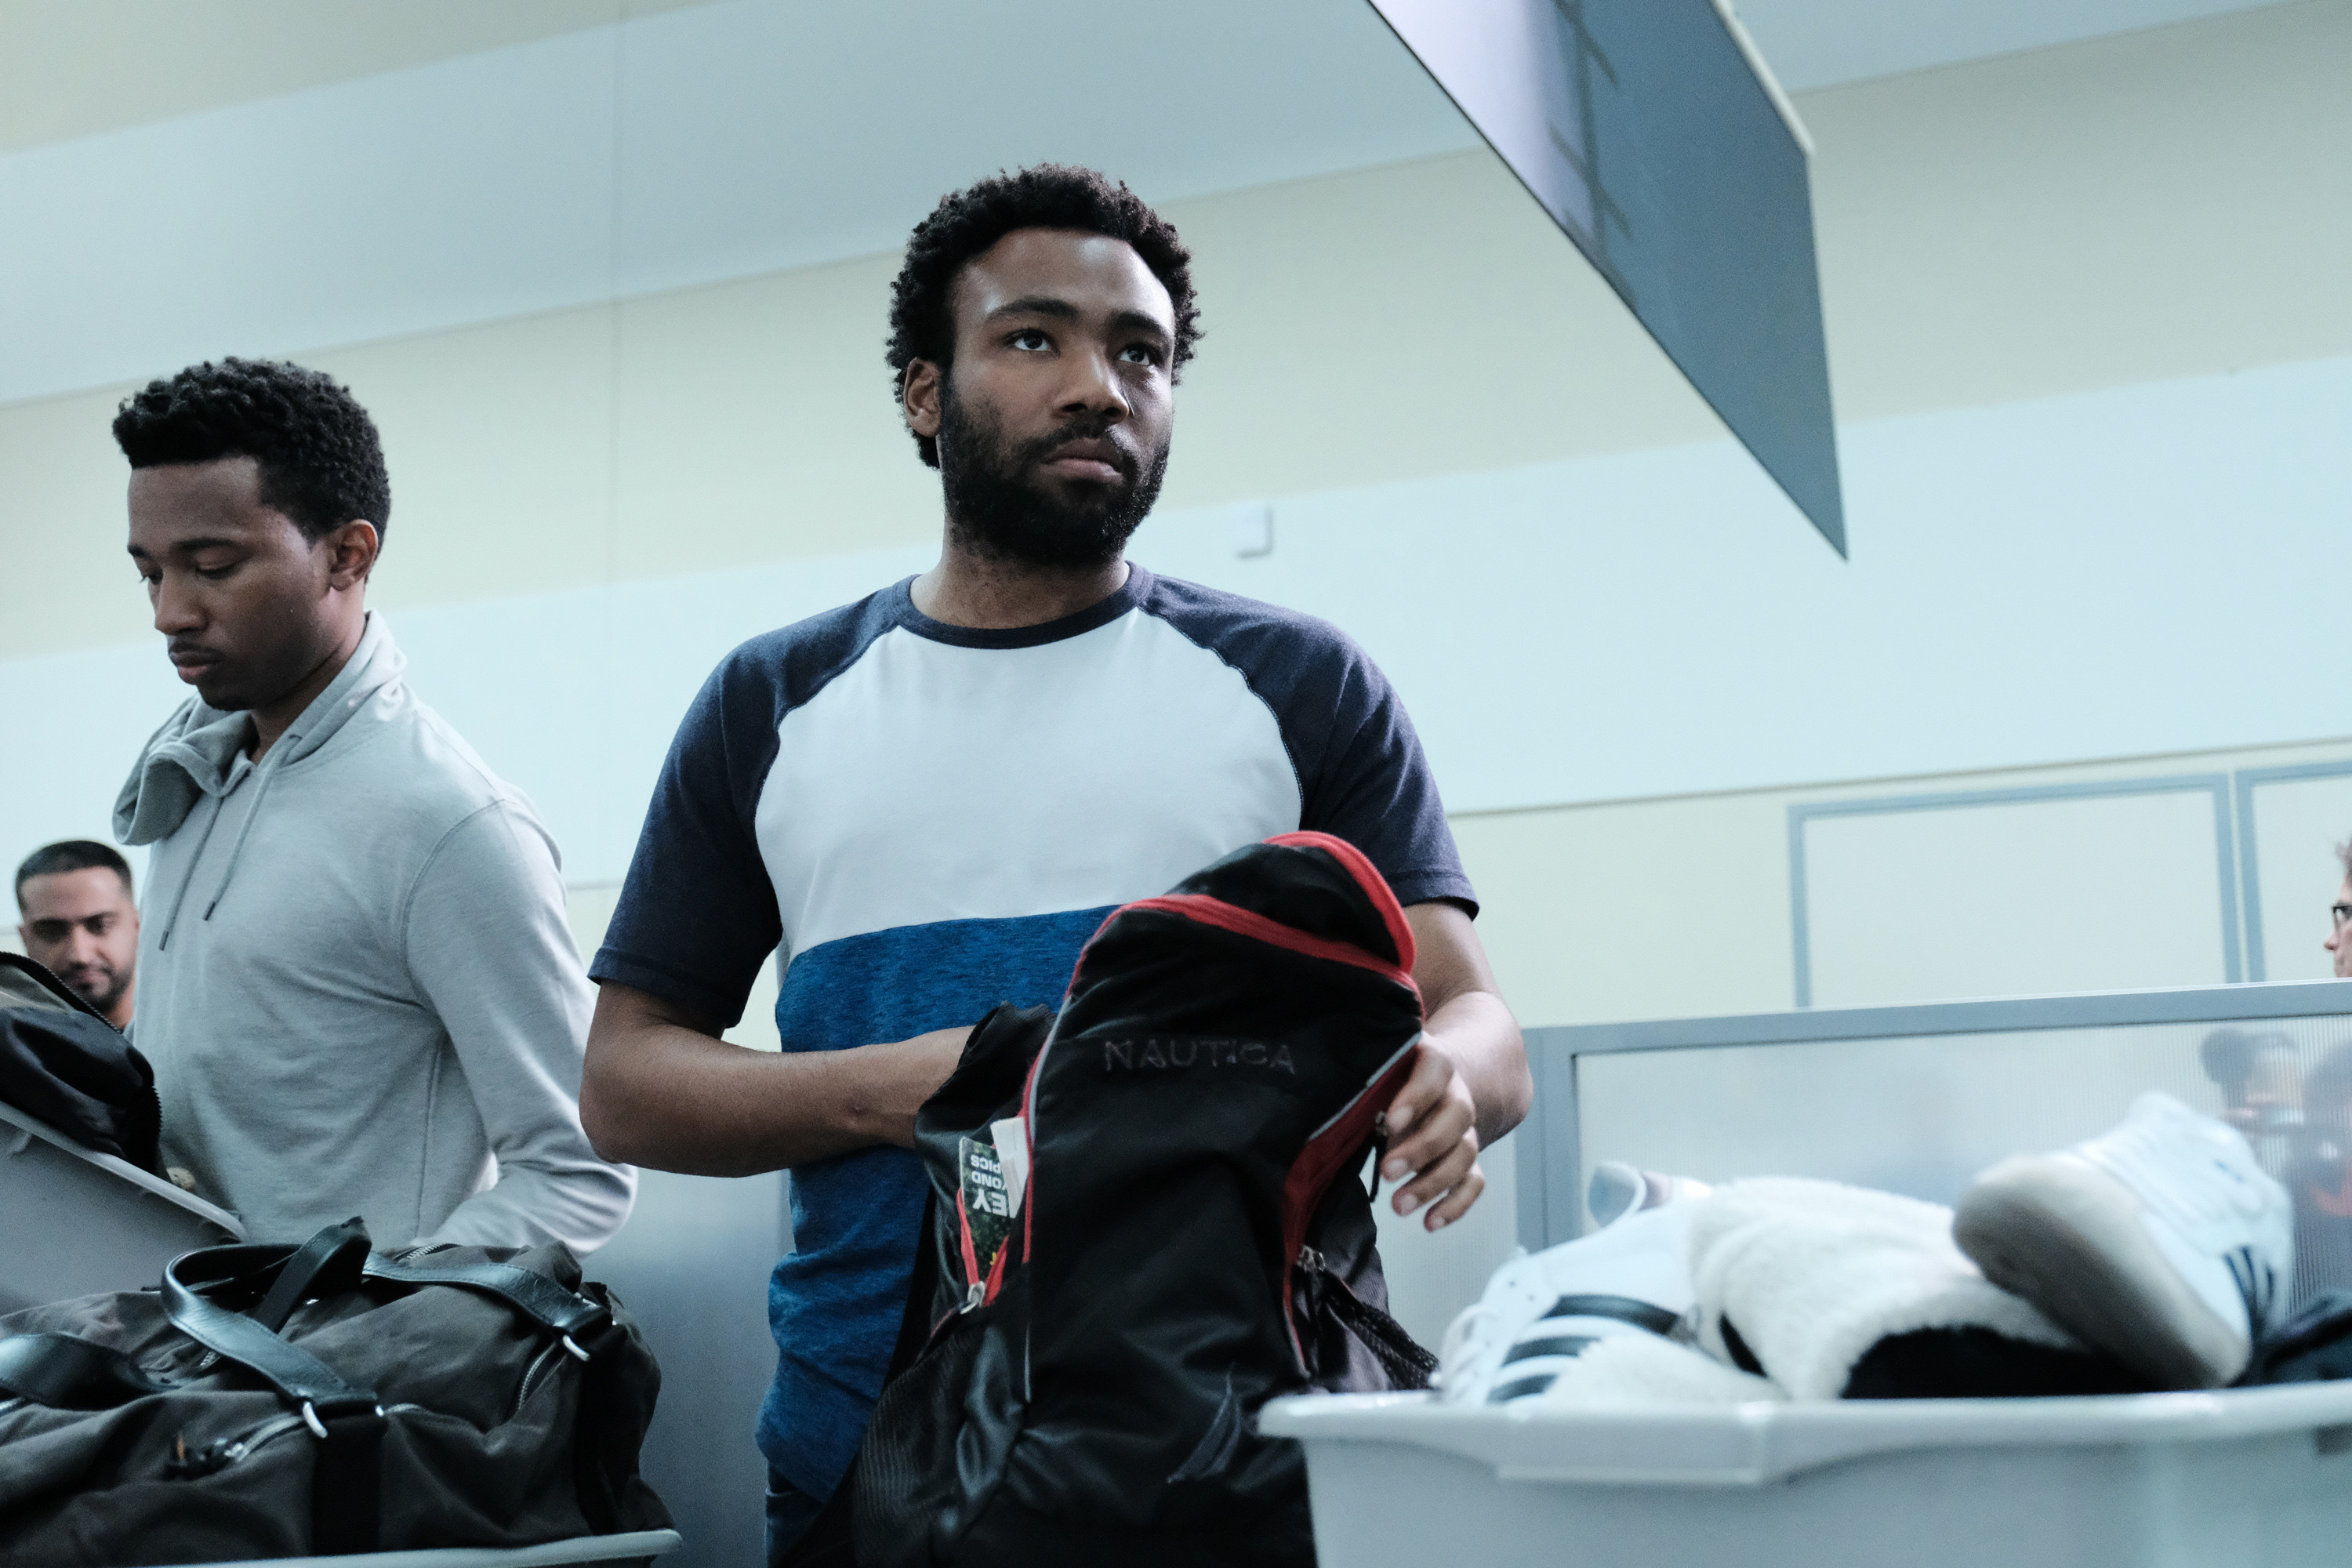 Atlanta, from left: RJ Walker, Donald Glover, &#x27;Crabs in a Barrel,&#x27; (Season 2, ep. 211, aired May 10, 2018)